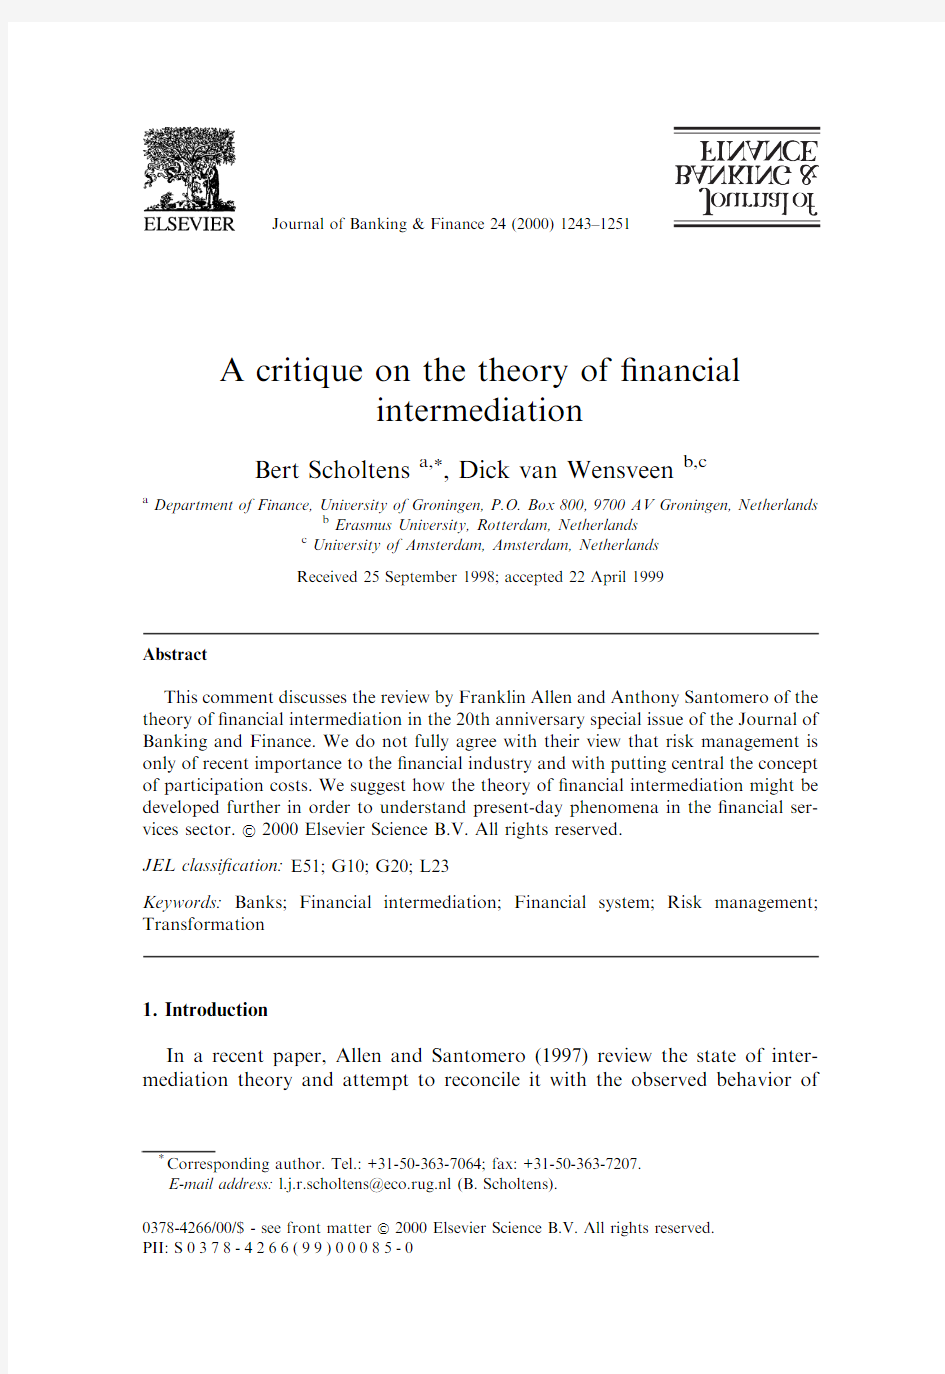 A critique on the theory of financial intermediation